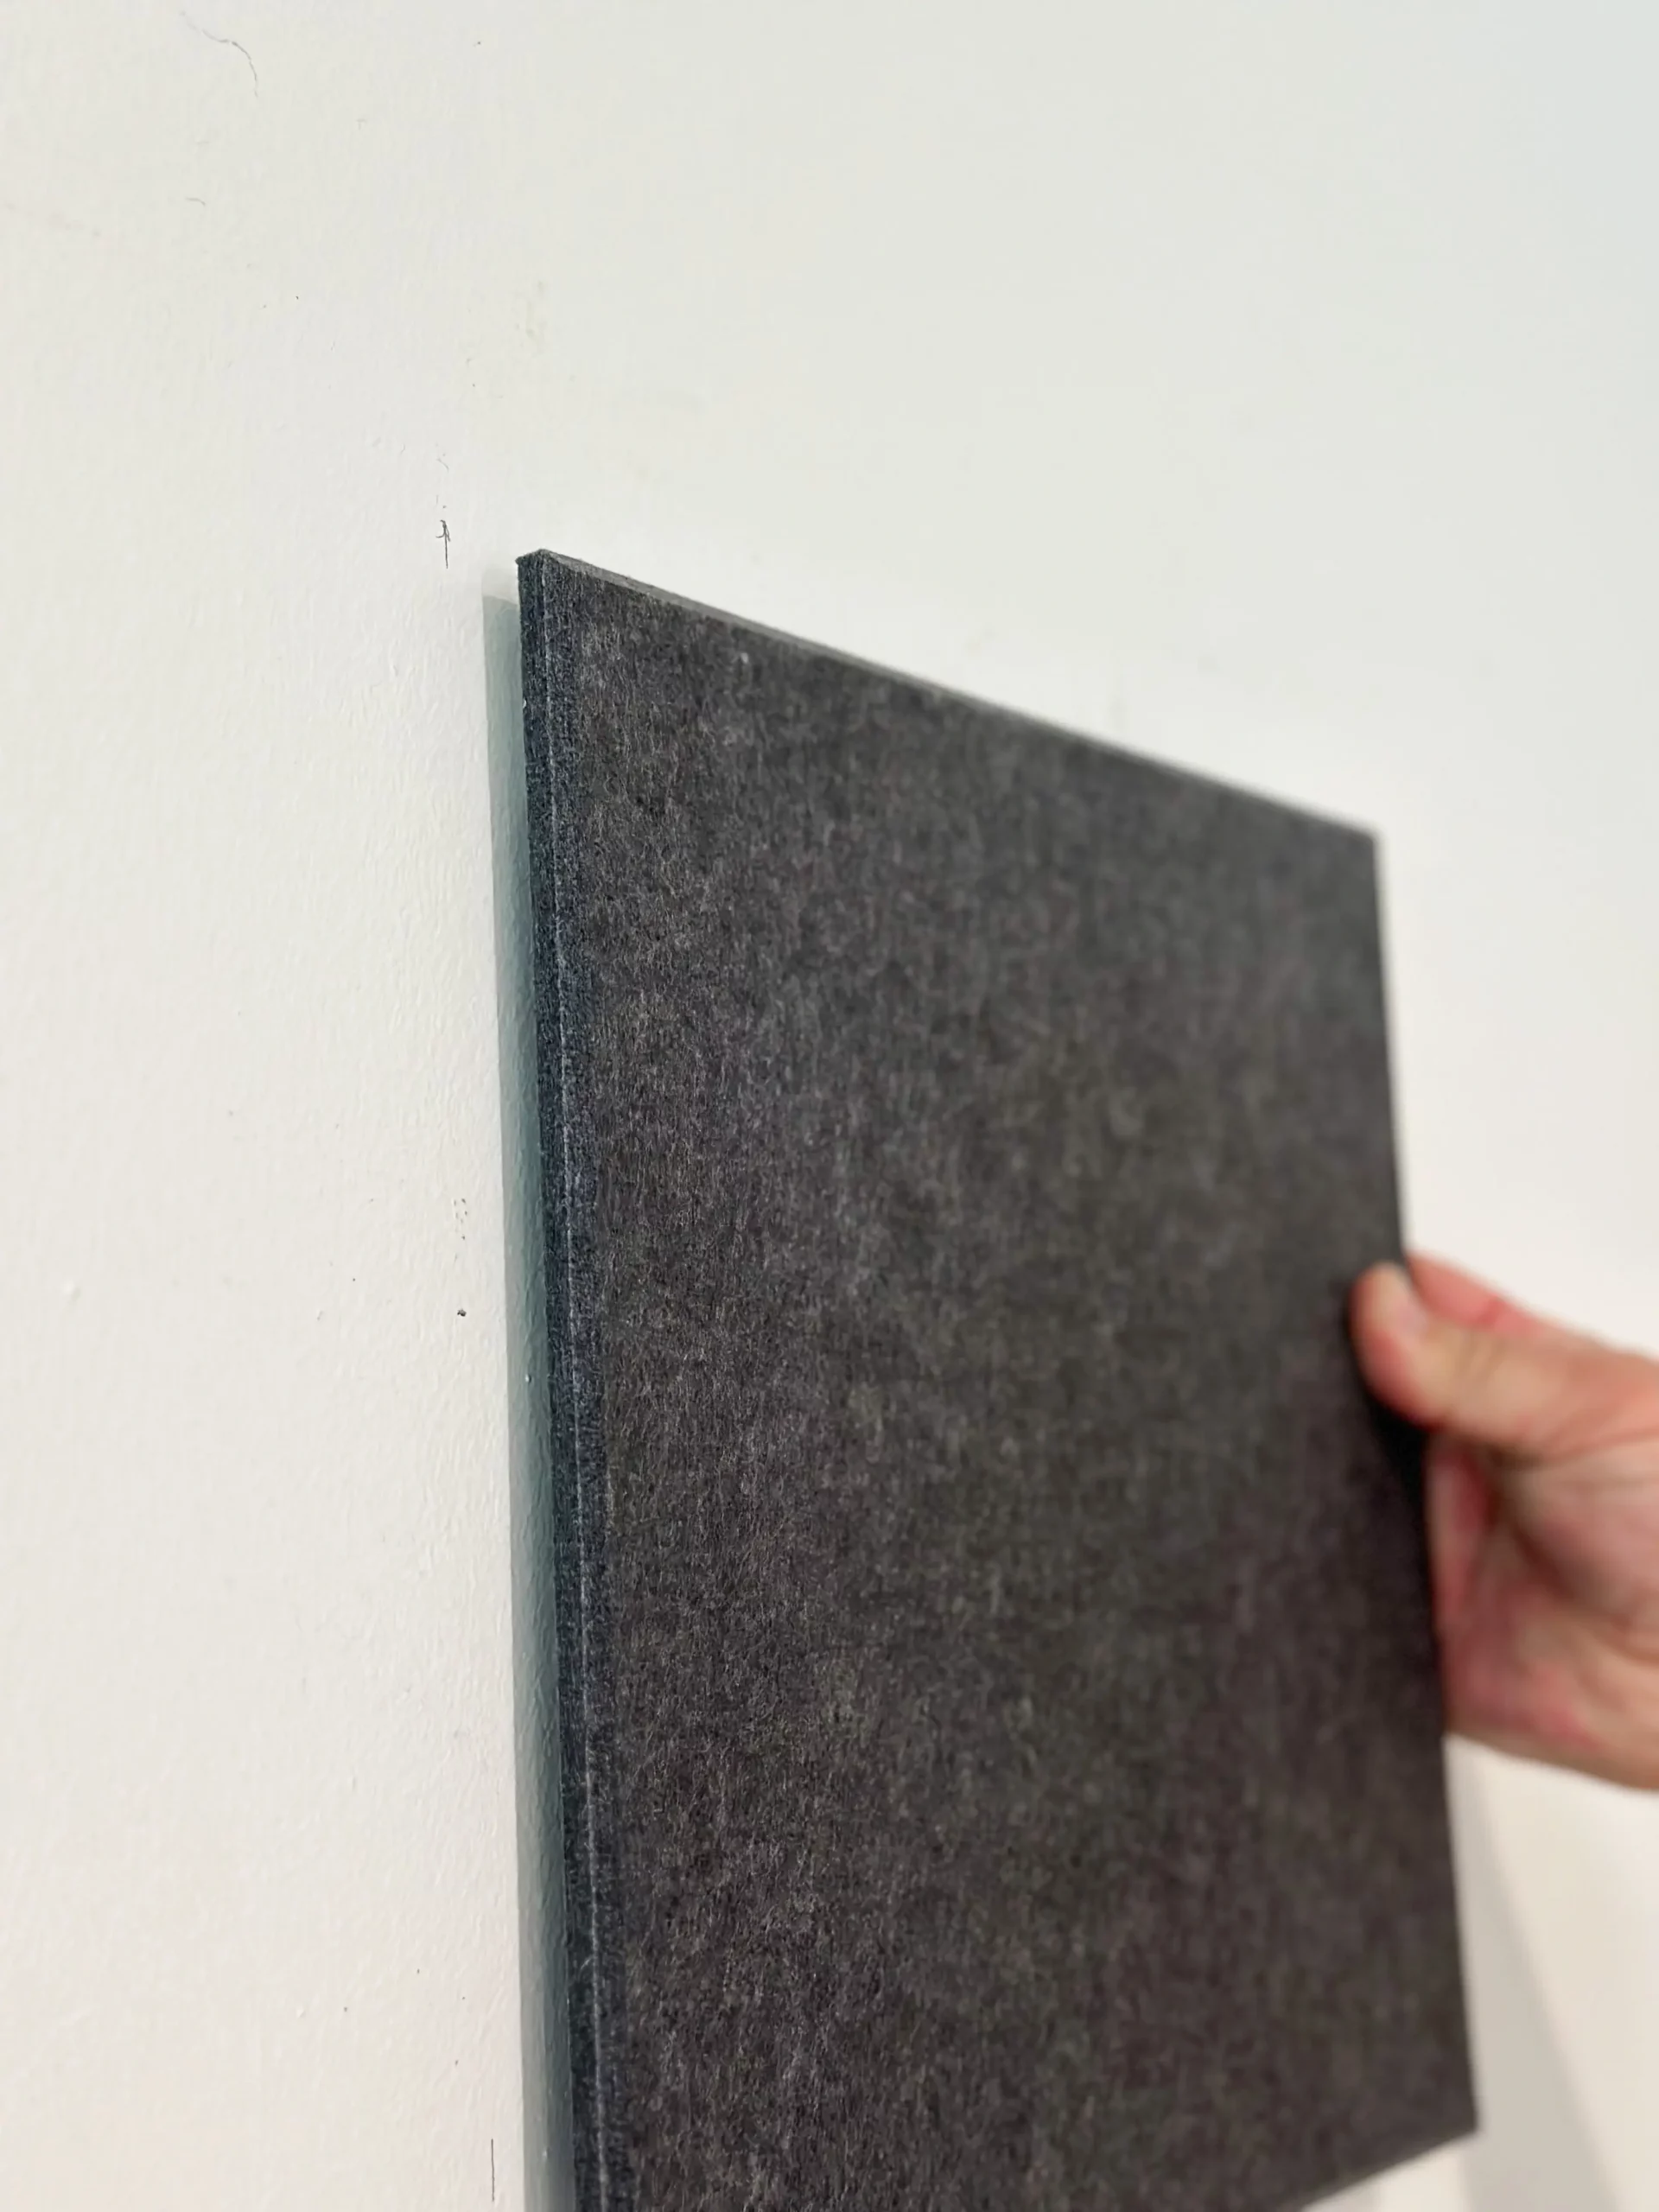 dark square of the felt tic-tac-toe board being placed on the wall